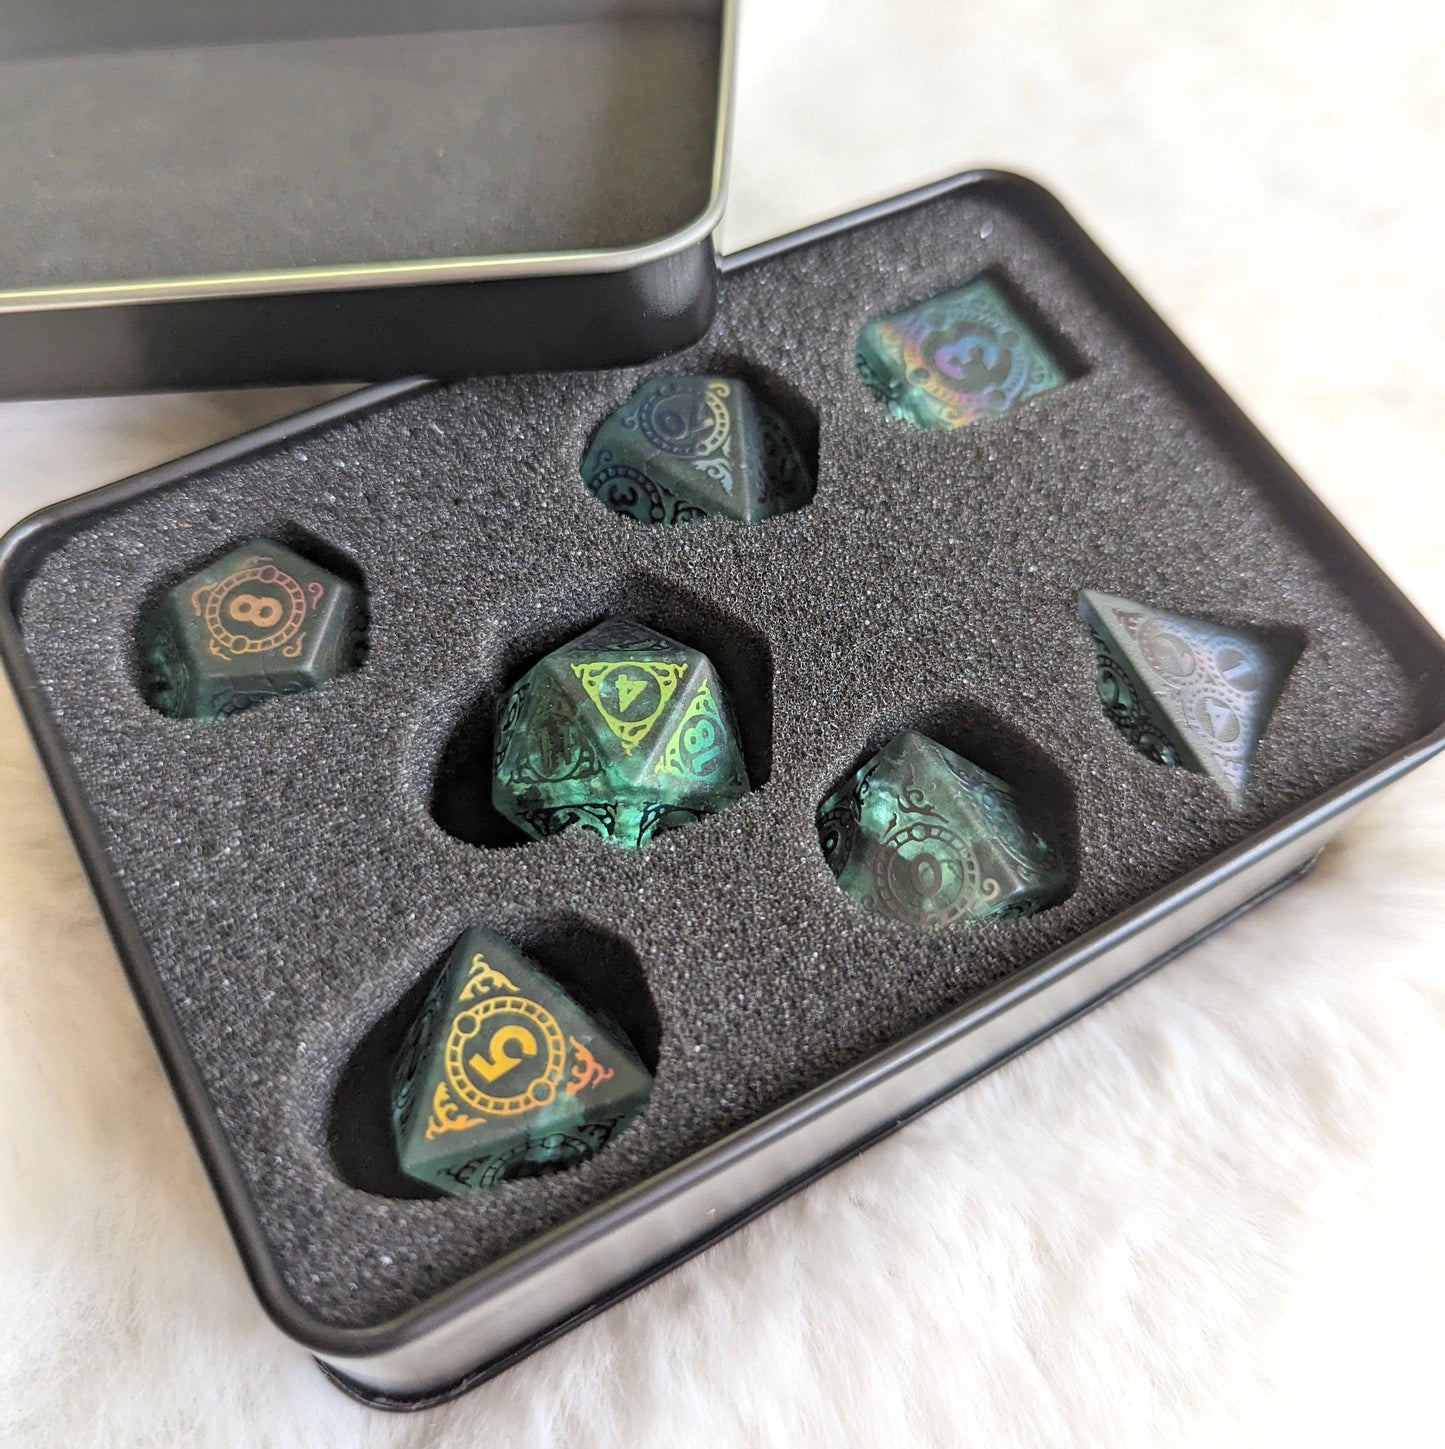 Summoner - Frosted Green Glass 7 Piece Dice Set